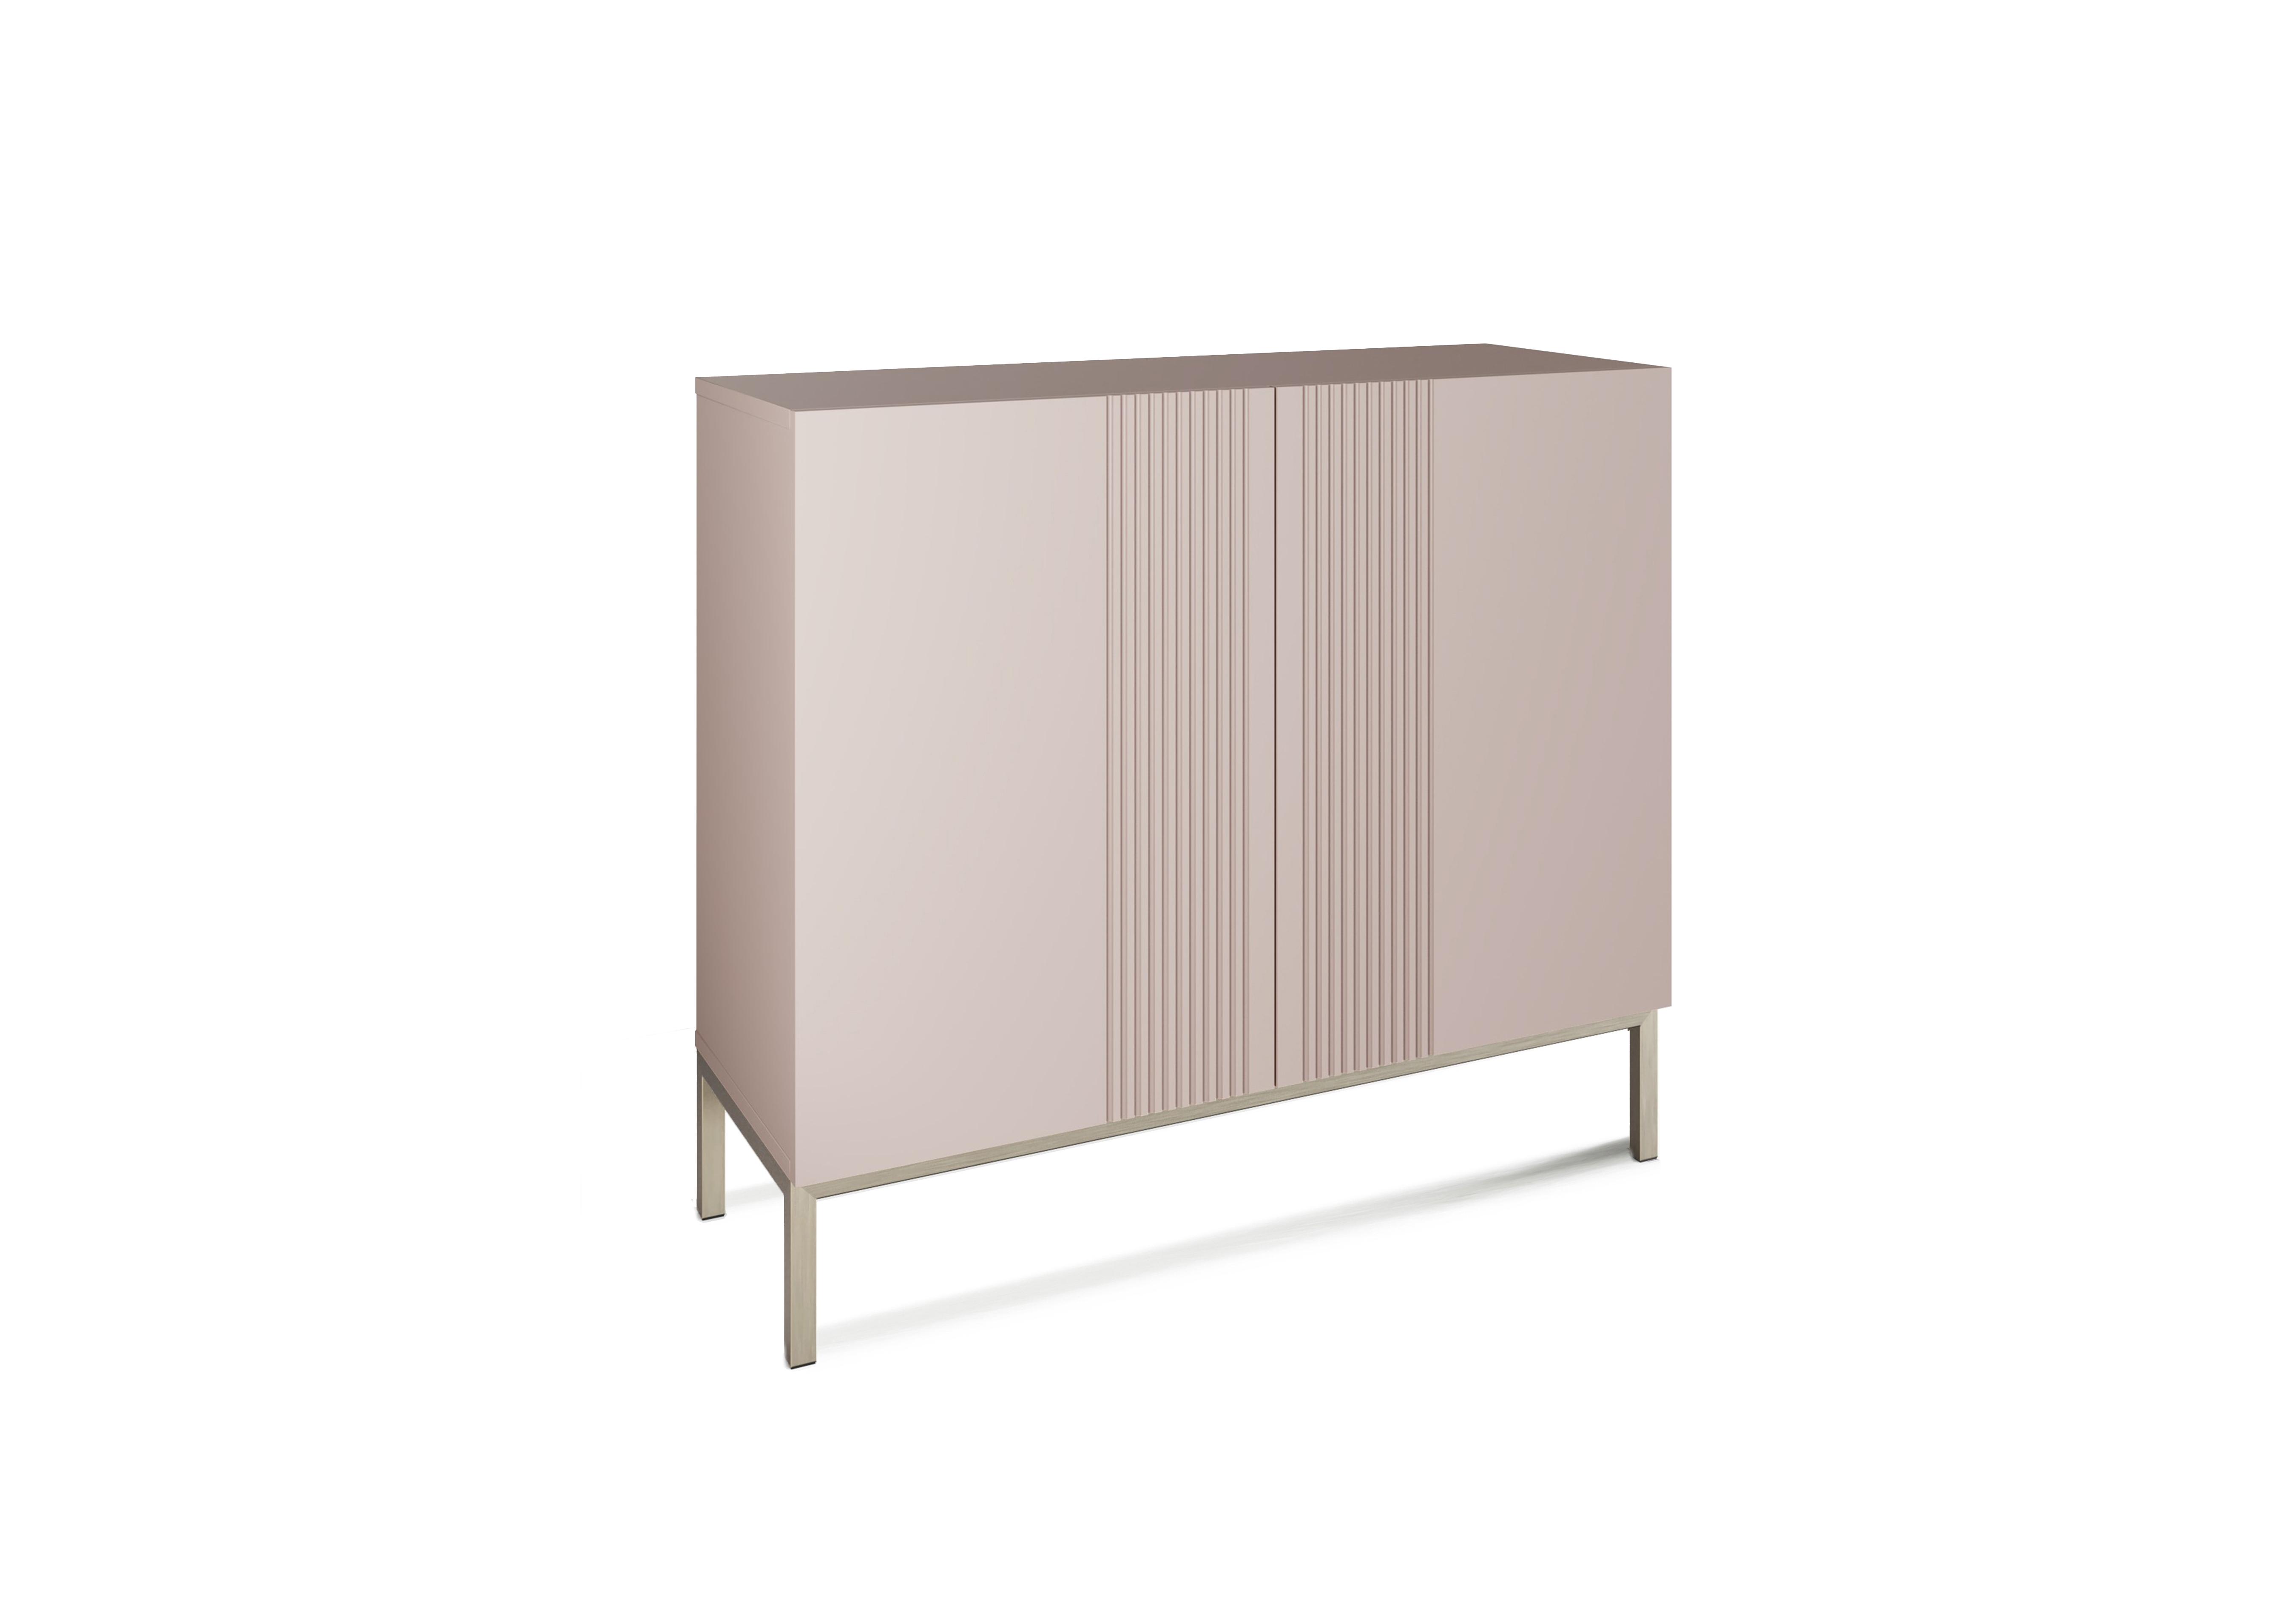 Delta 2 Door Sideboard with Smart LED Lighting in Mulberry on Furniture Village